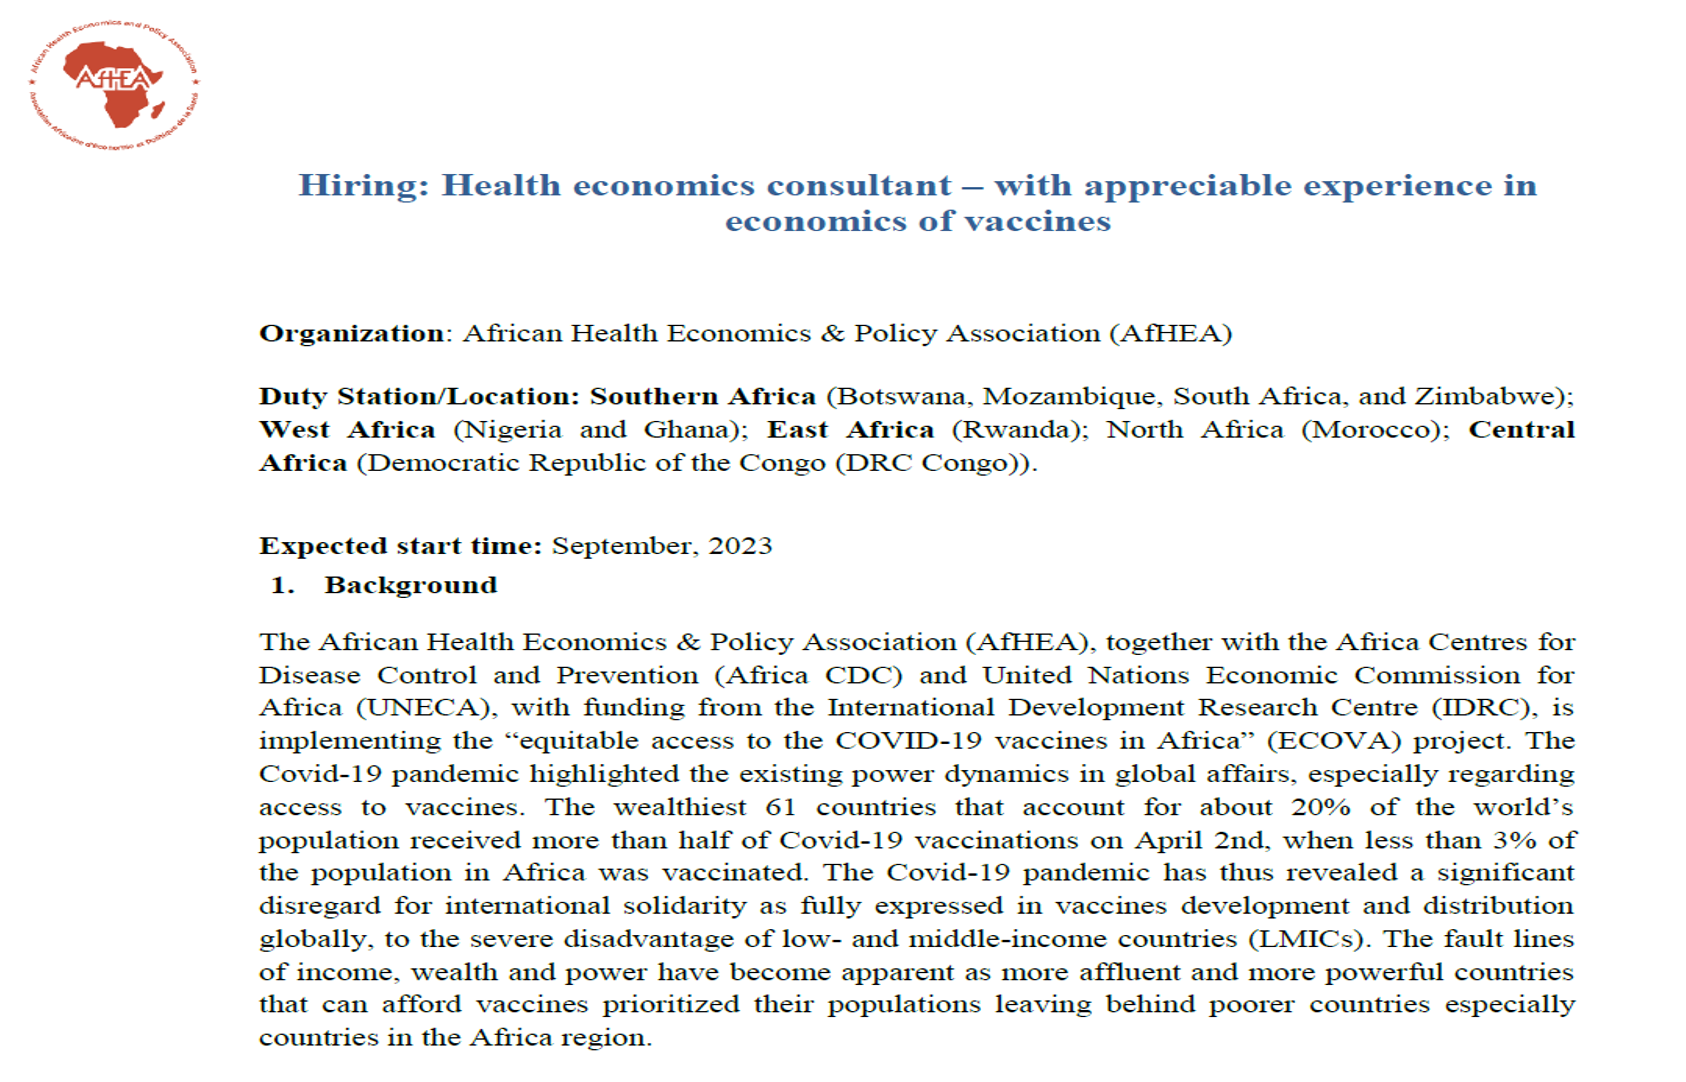 Featured image for “Hiring: Health Economics Consultants – with appreciable experience in the economics of vaccines”